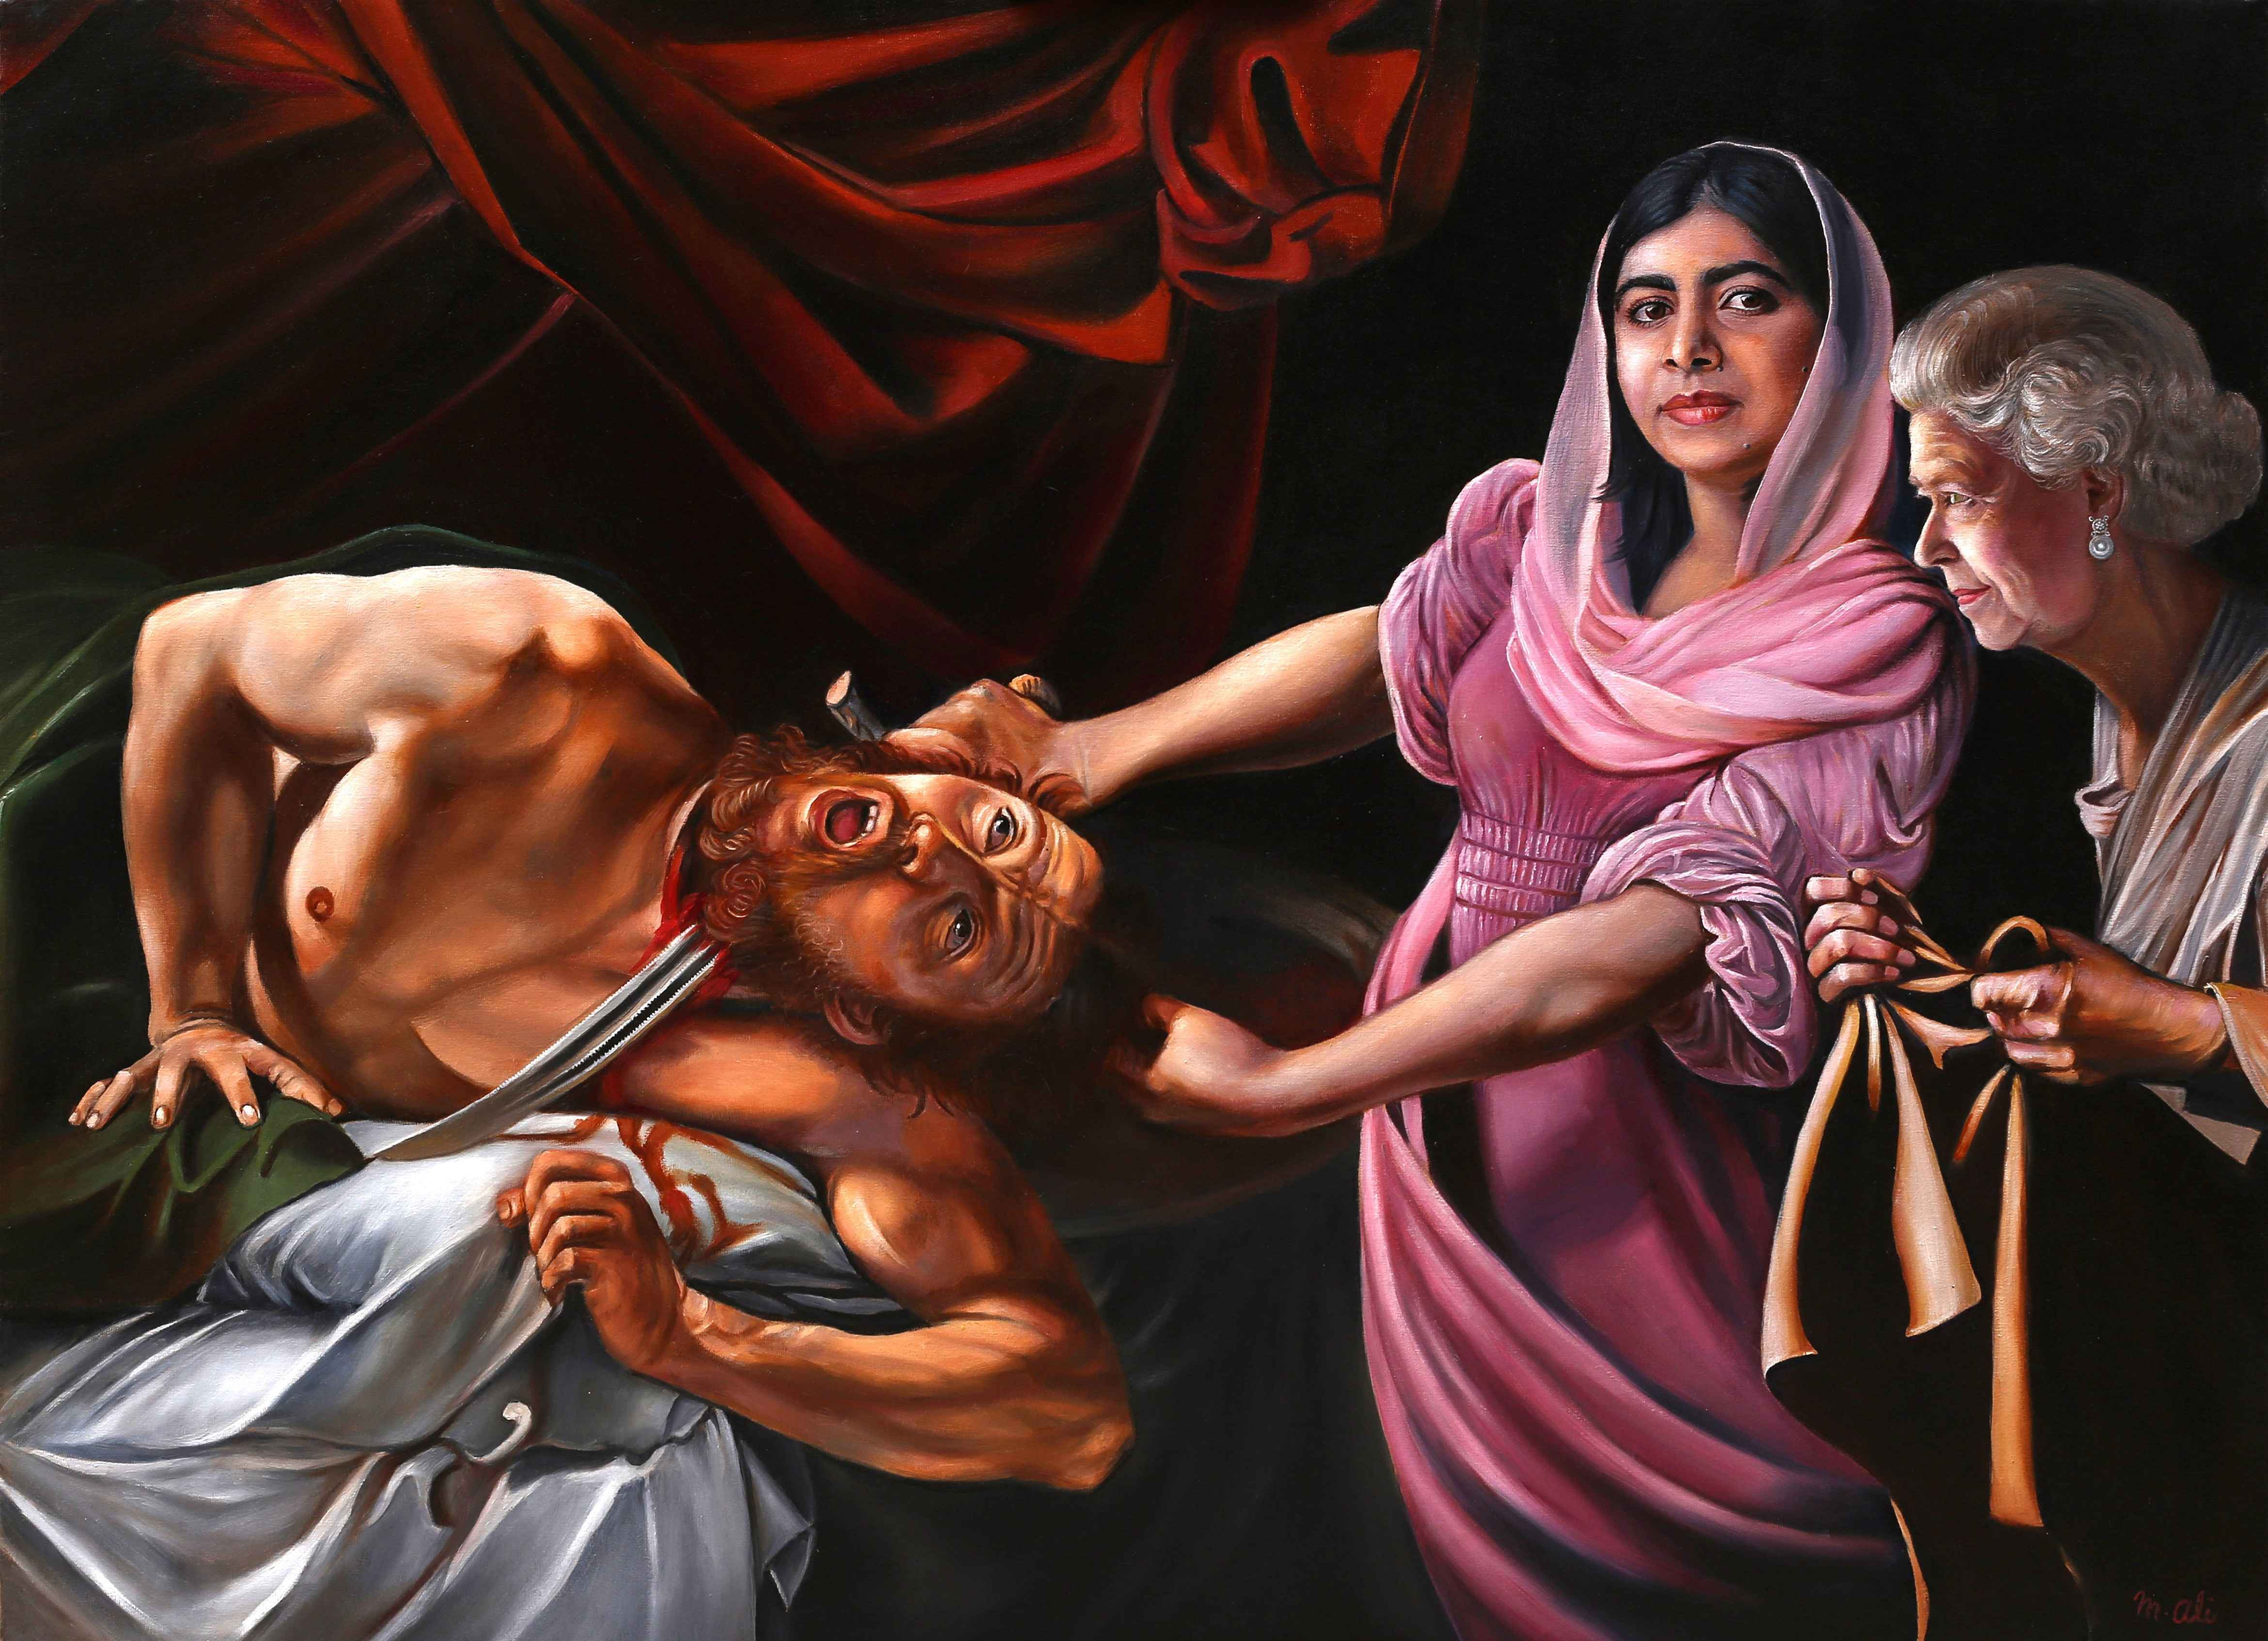 Artist:Mohammad Ali <br> Title: Education Rejoicing While Beheading Oppression<br> Medium: Oil on Canvas<br> Size: 48x36inches